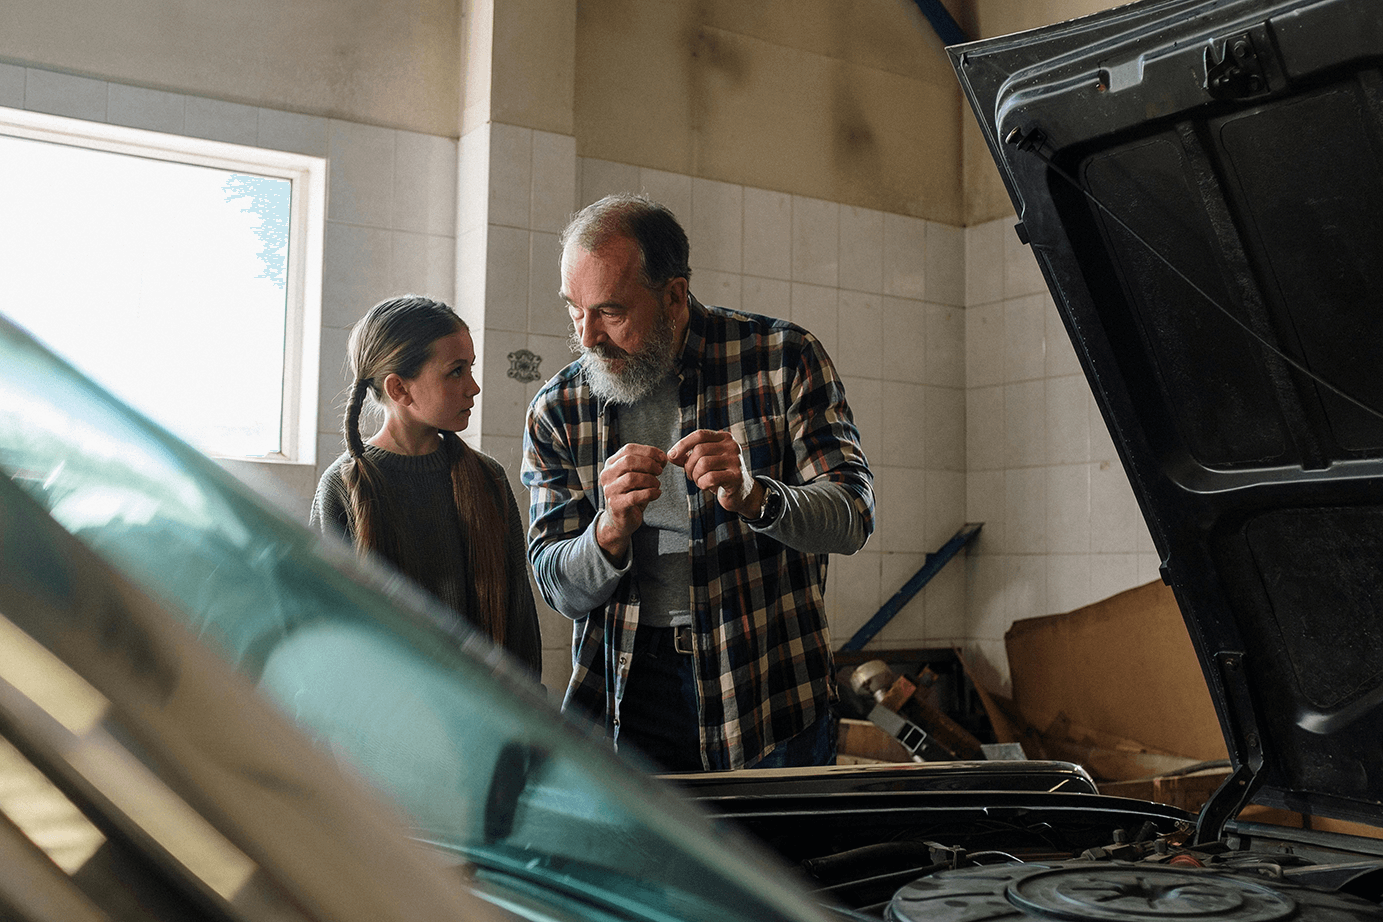 A father figure and young girl working together on a car.